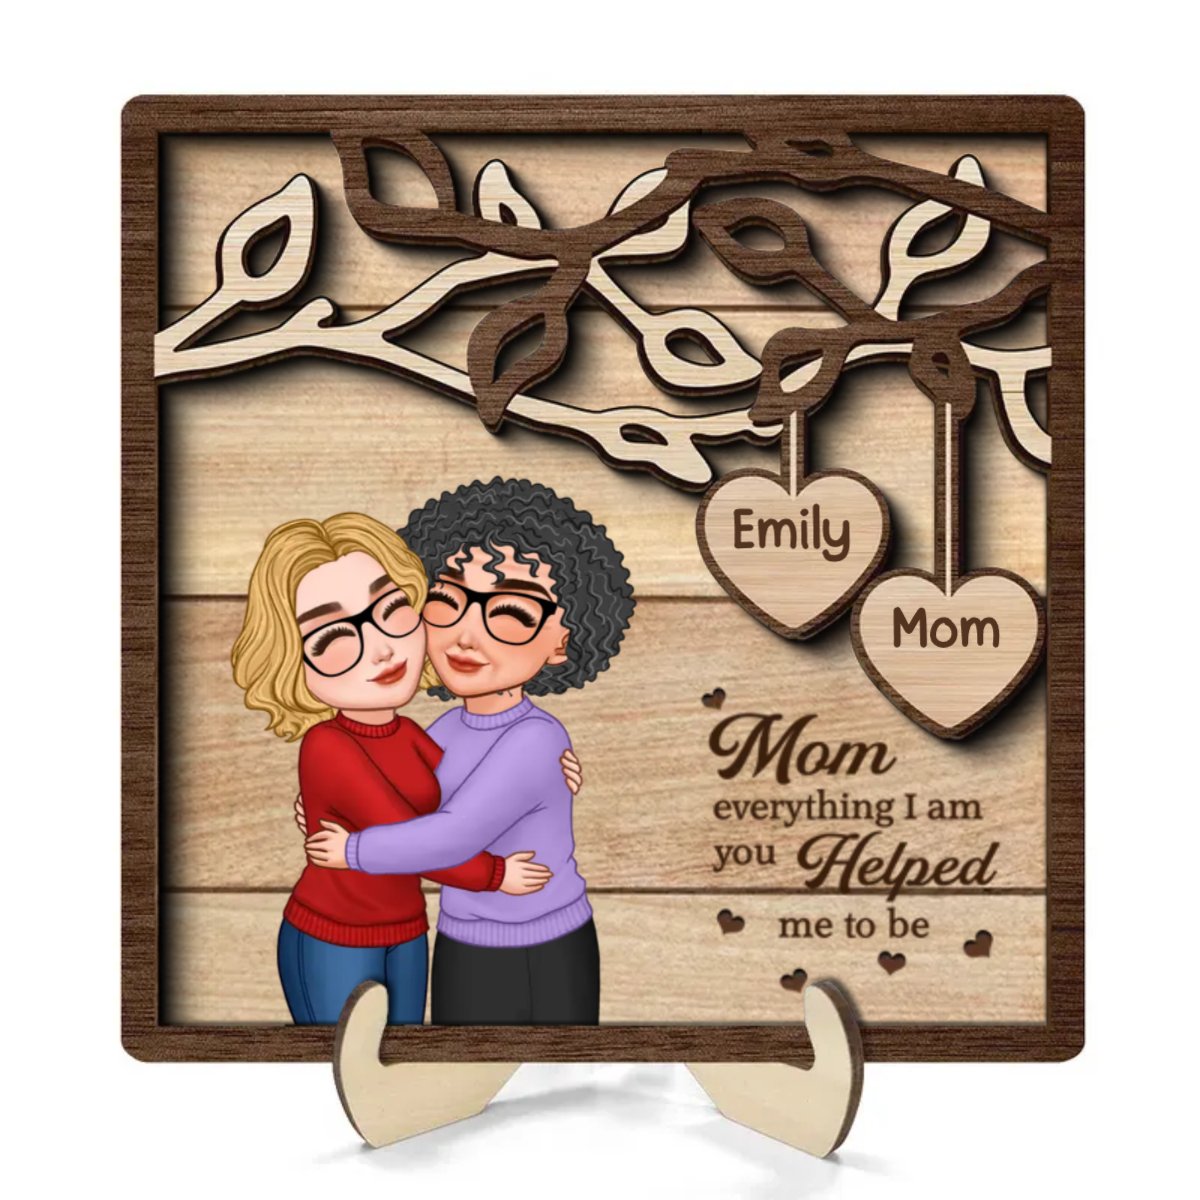 Family - Mom Hugging Daughter Son Under Tree - Personalized Wooden Plaque - The Next Custom Gift